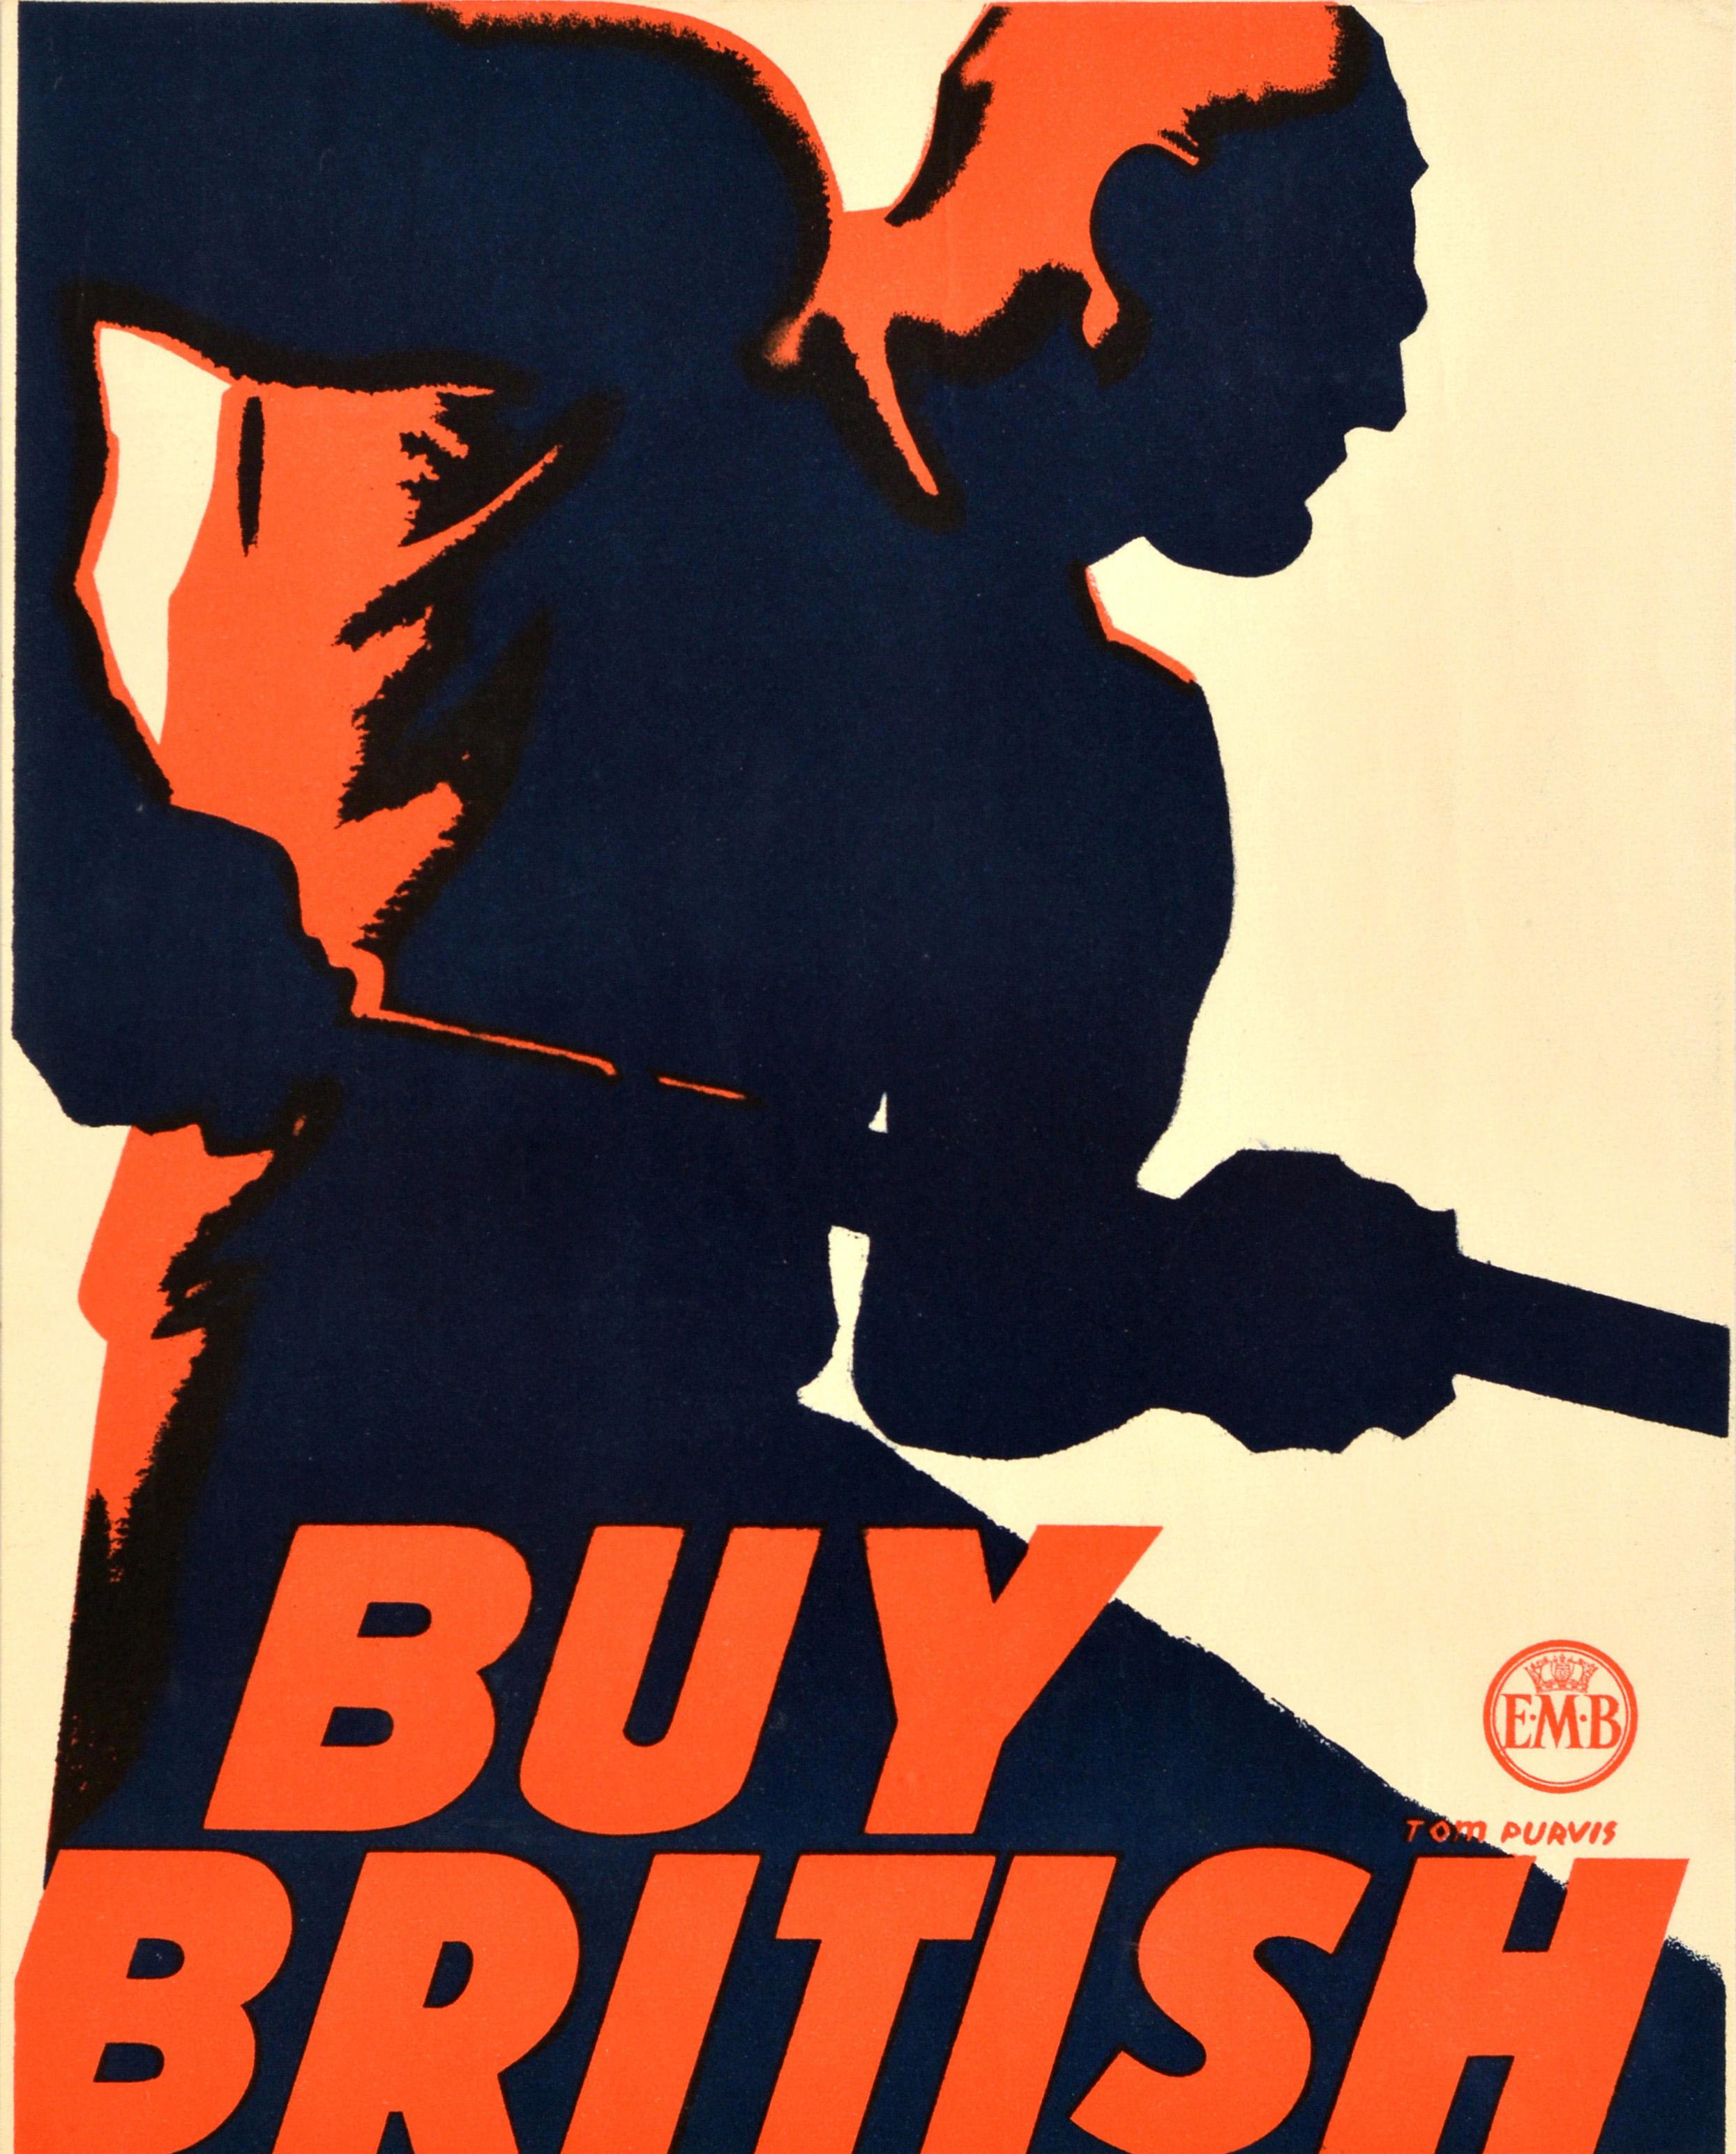 Original vintage poster issued by the Empire Marketing Board EMB to encourage people to help the economy following the Great Depression in America by buying British goods - Buy British from the Empire at Home & Overseas - featuring a dynamic design